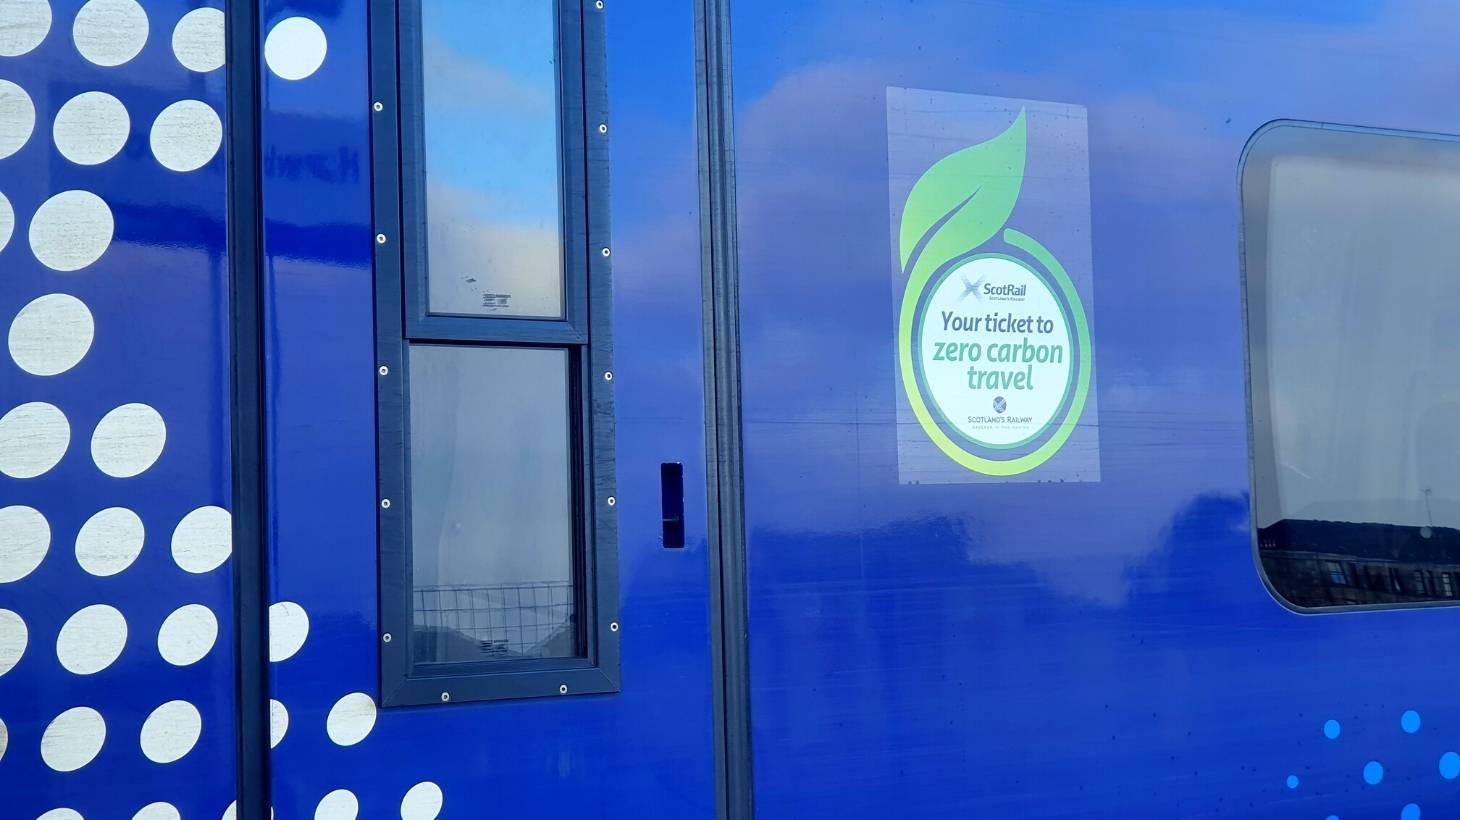 Blue ScotRail train with green logo saying ScotRail your ticket to zero carbon travel